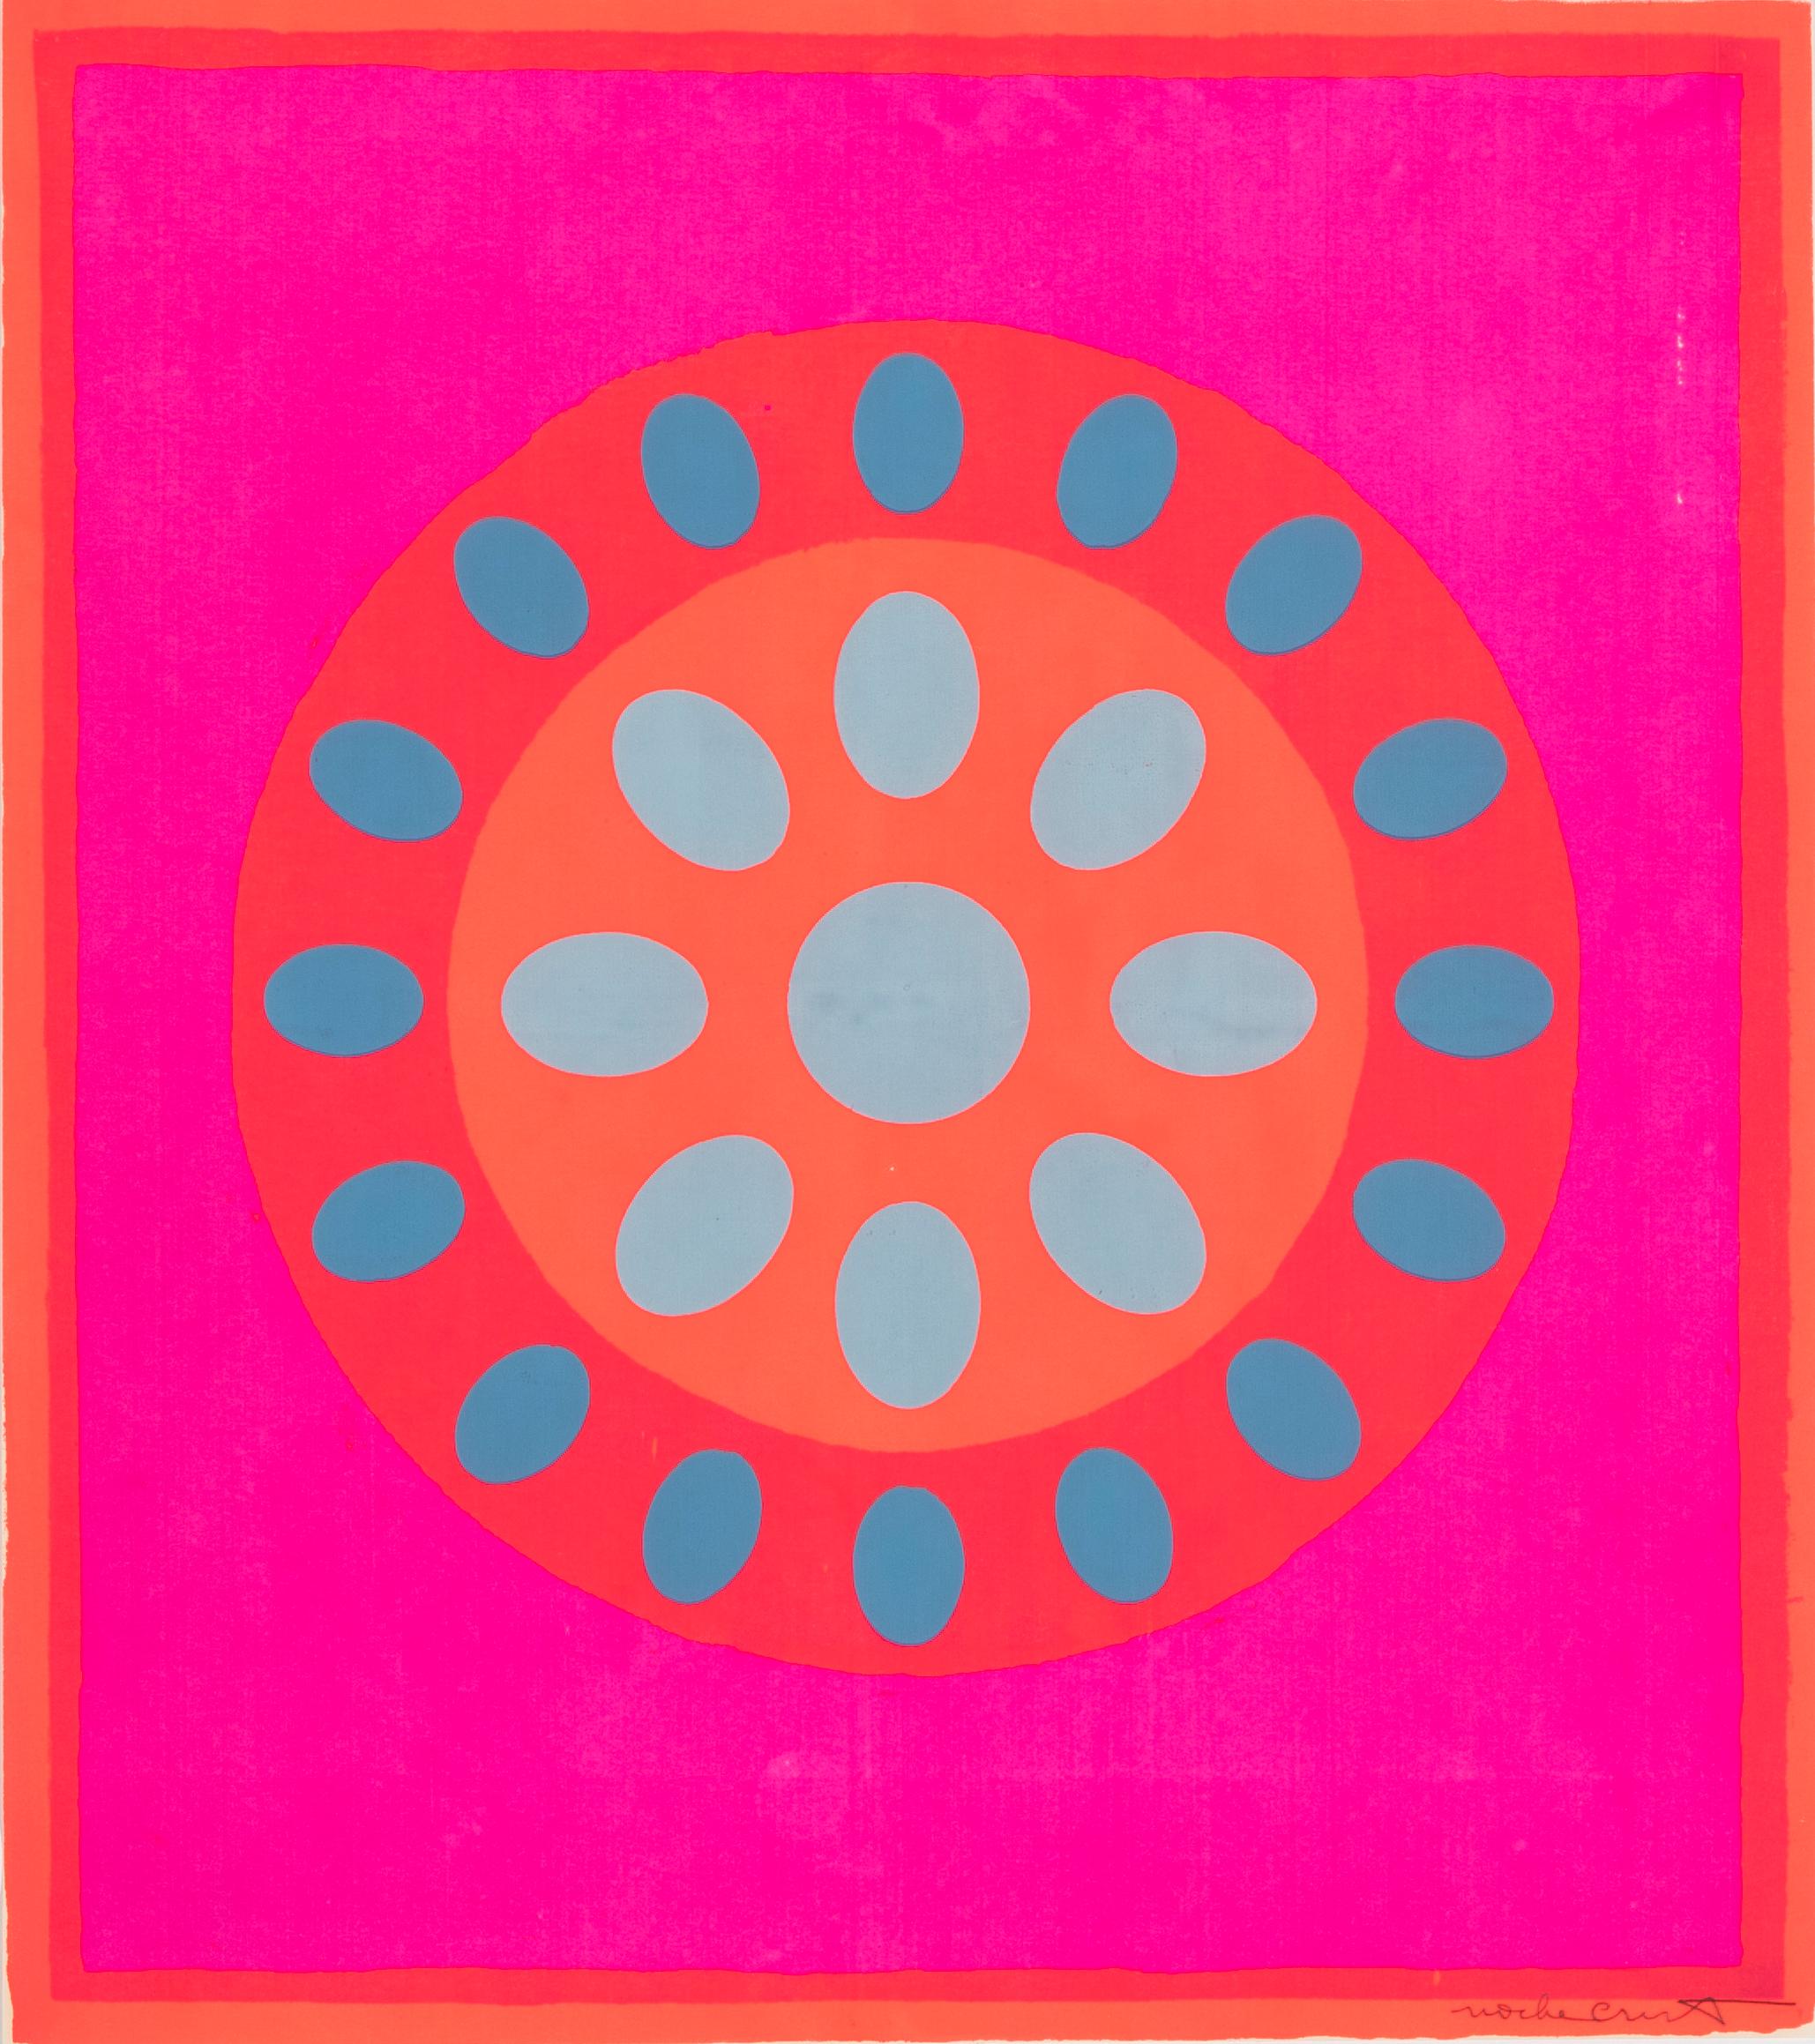 Noche Crist Abstract Print - Pink Pop Art "In the Sun", 1960s